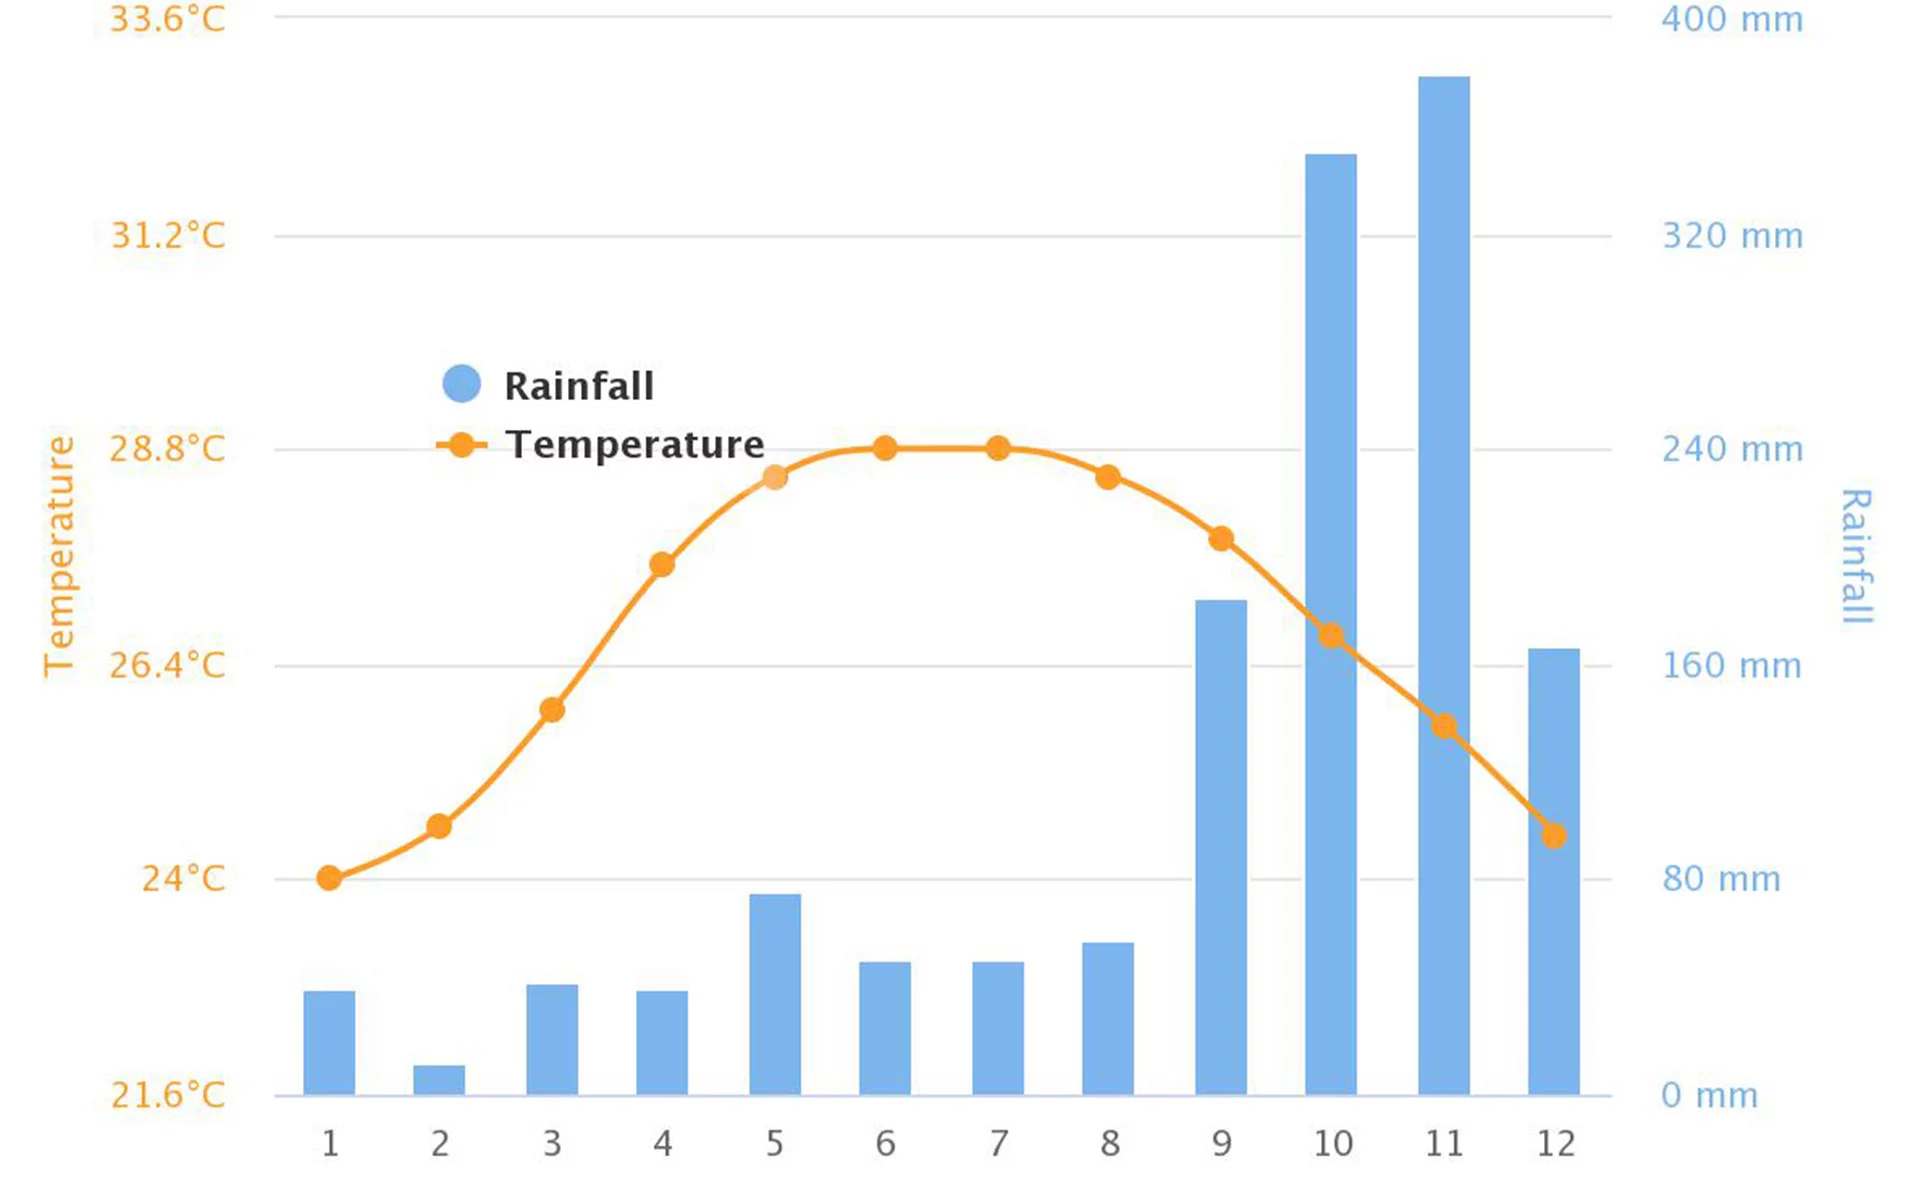 Nha Trang weather by month